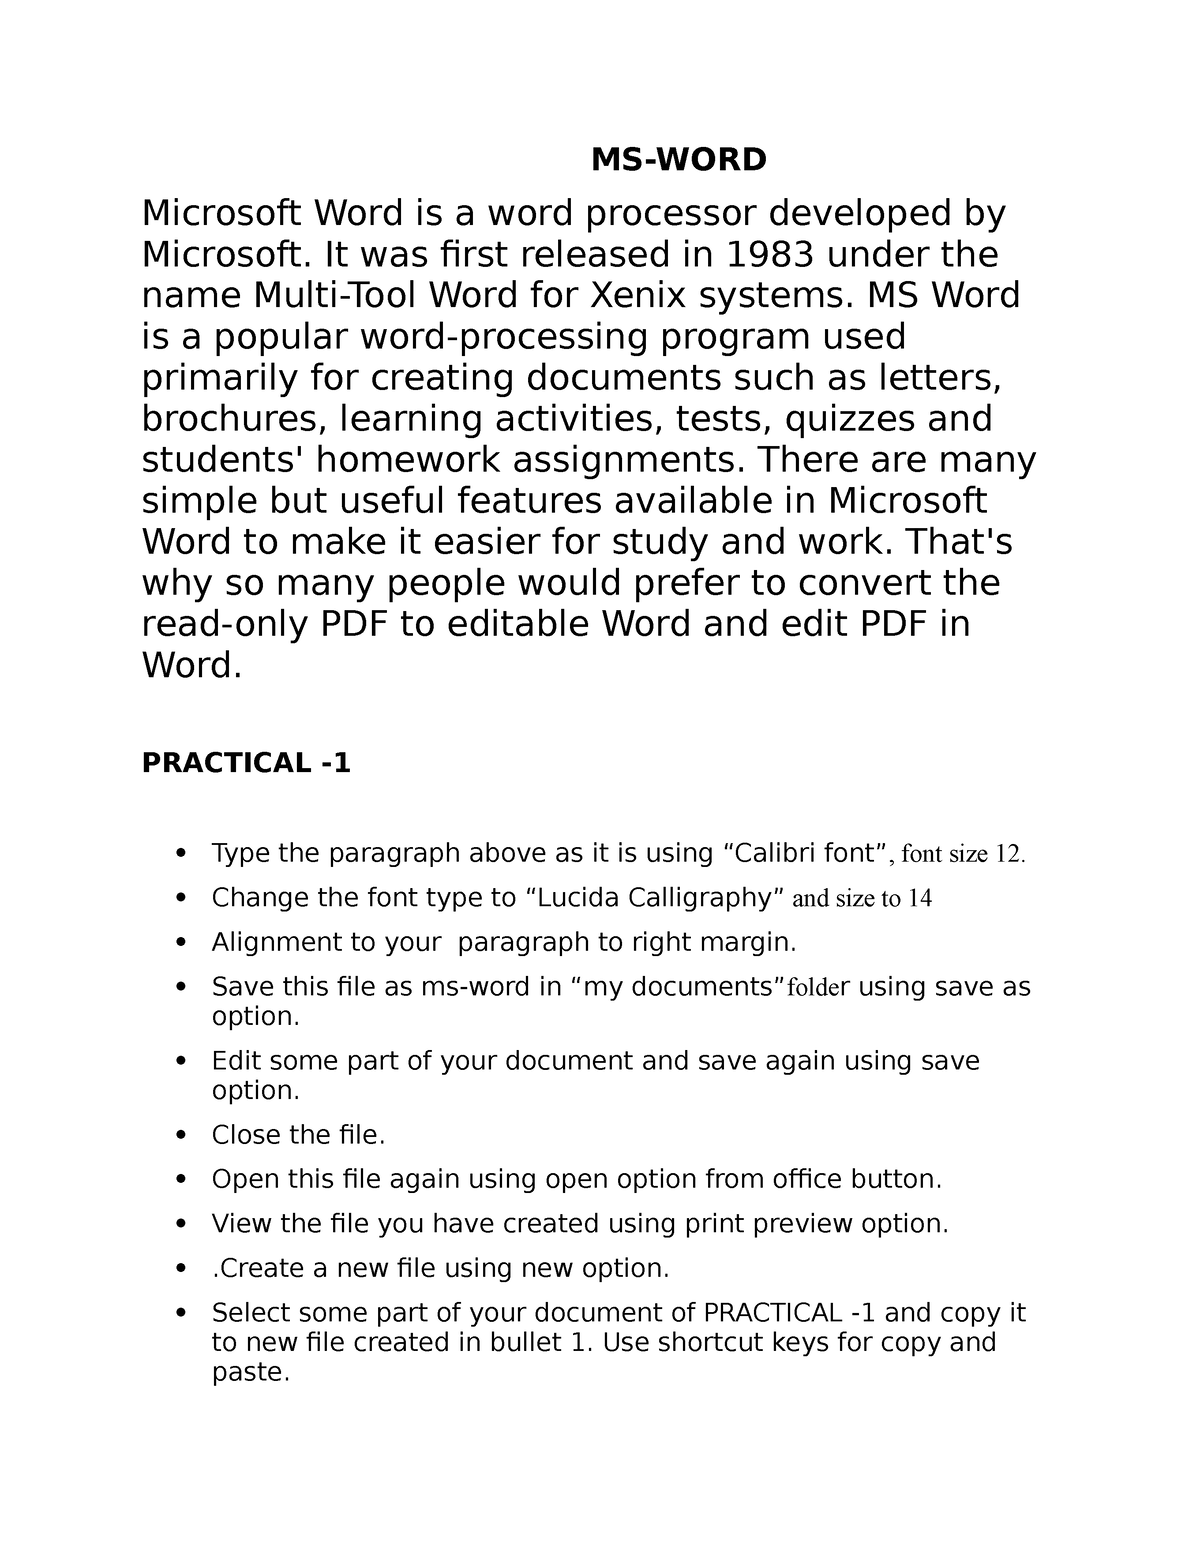 ms-word-assignment-nmmmm-ms-word-microsoft-word-is-a-word-processor